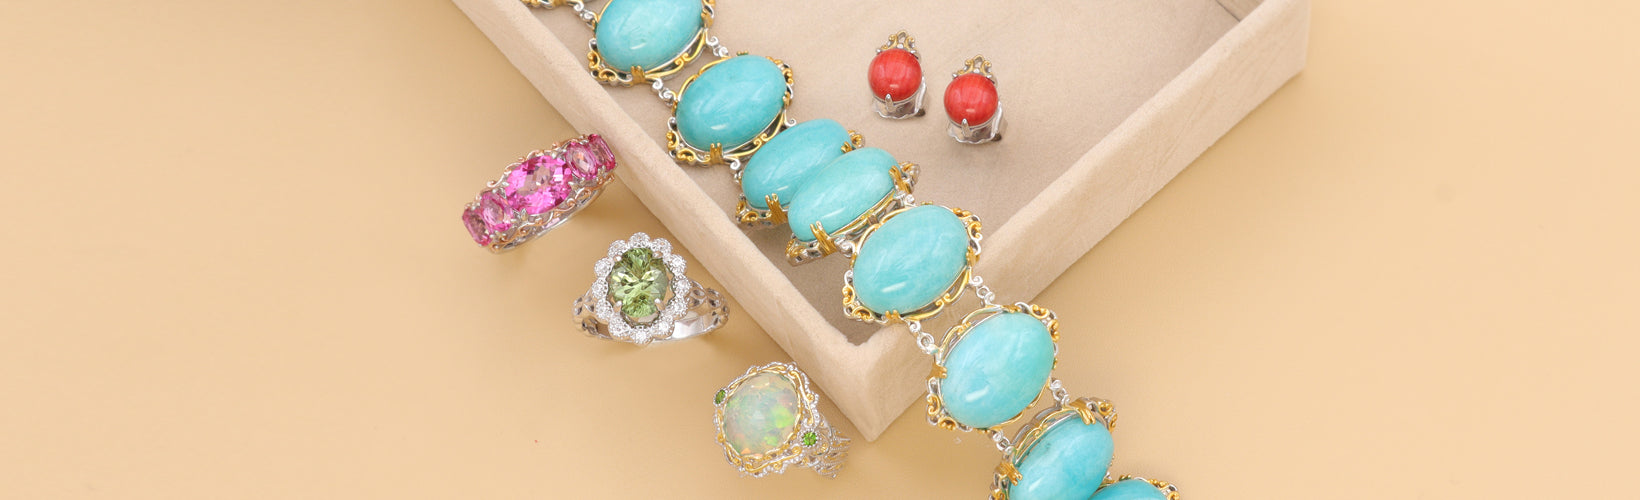 One-of-a-Kind Jewelry Collection